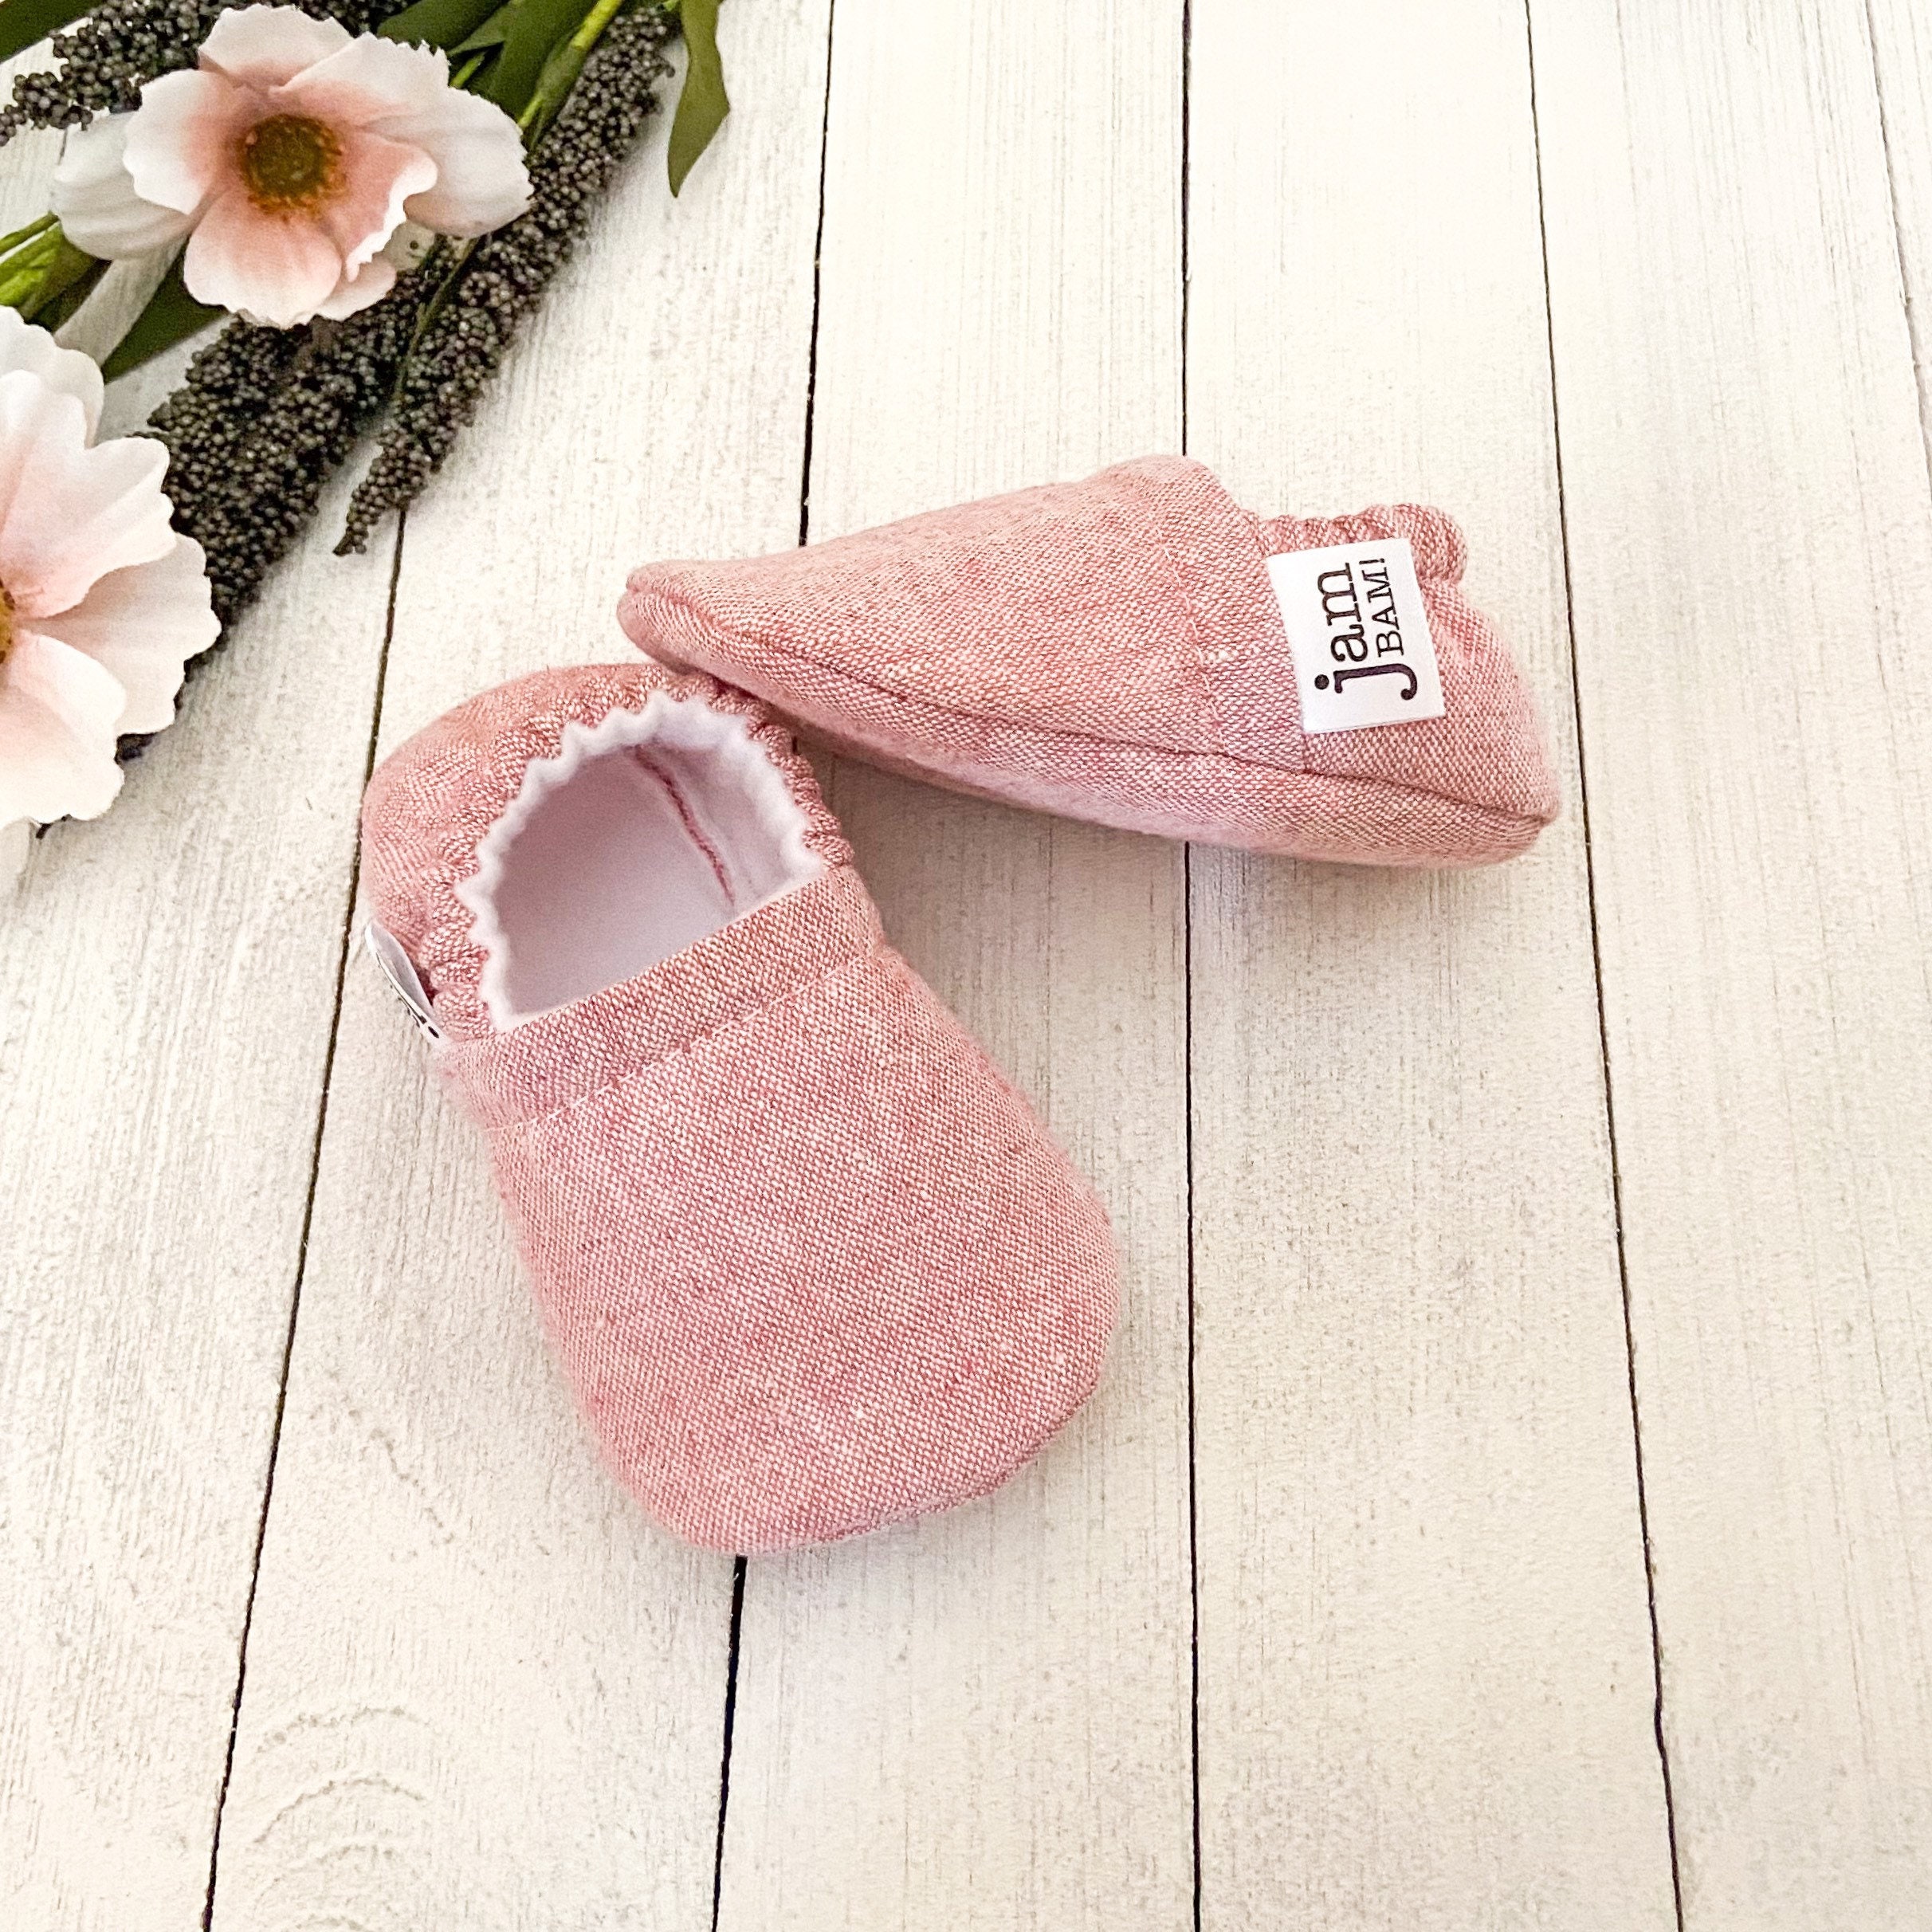 Raspberry Linen Blend Baby Booties, Slippers, Crib Shoes, Soft Sole, Moccasins, Shoes